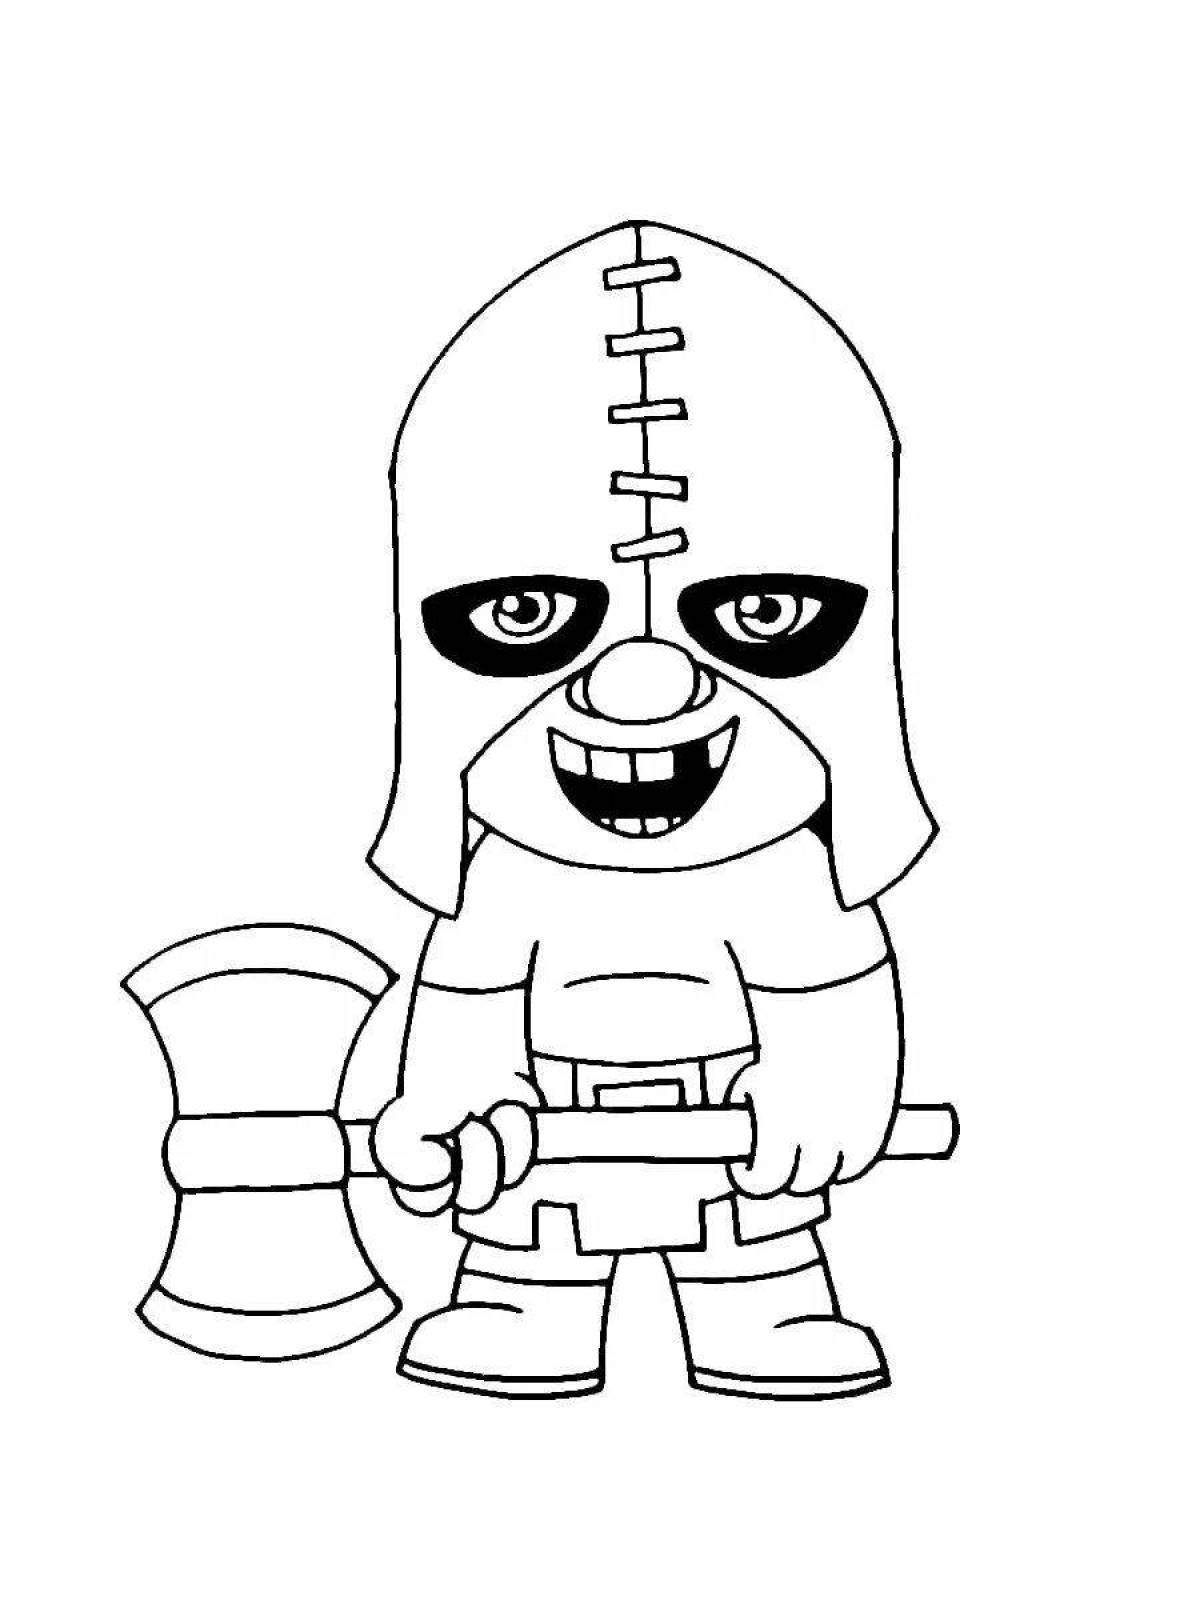 Majestic clash royale arena coloring page